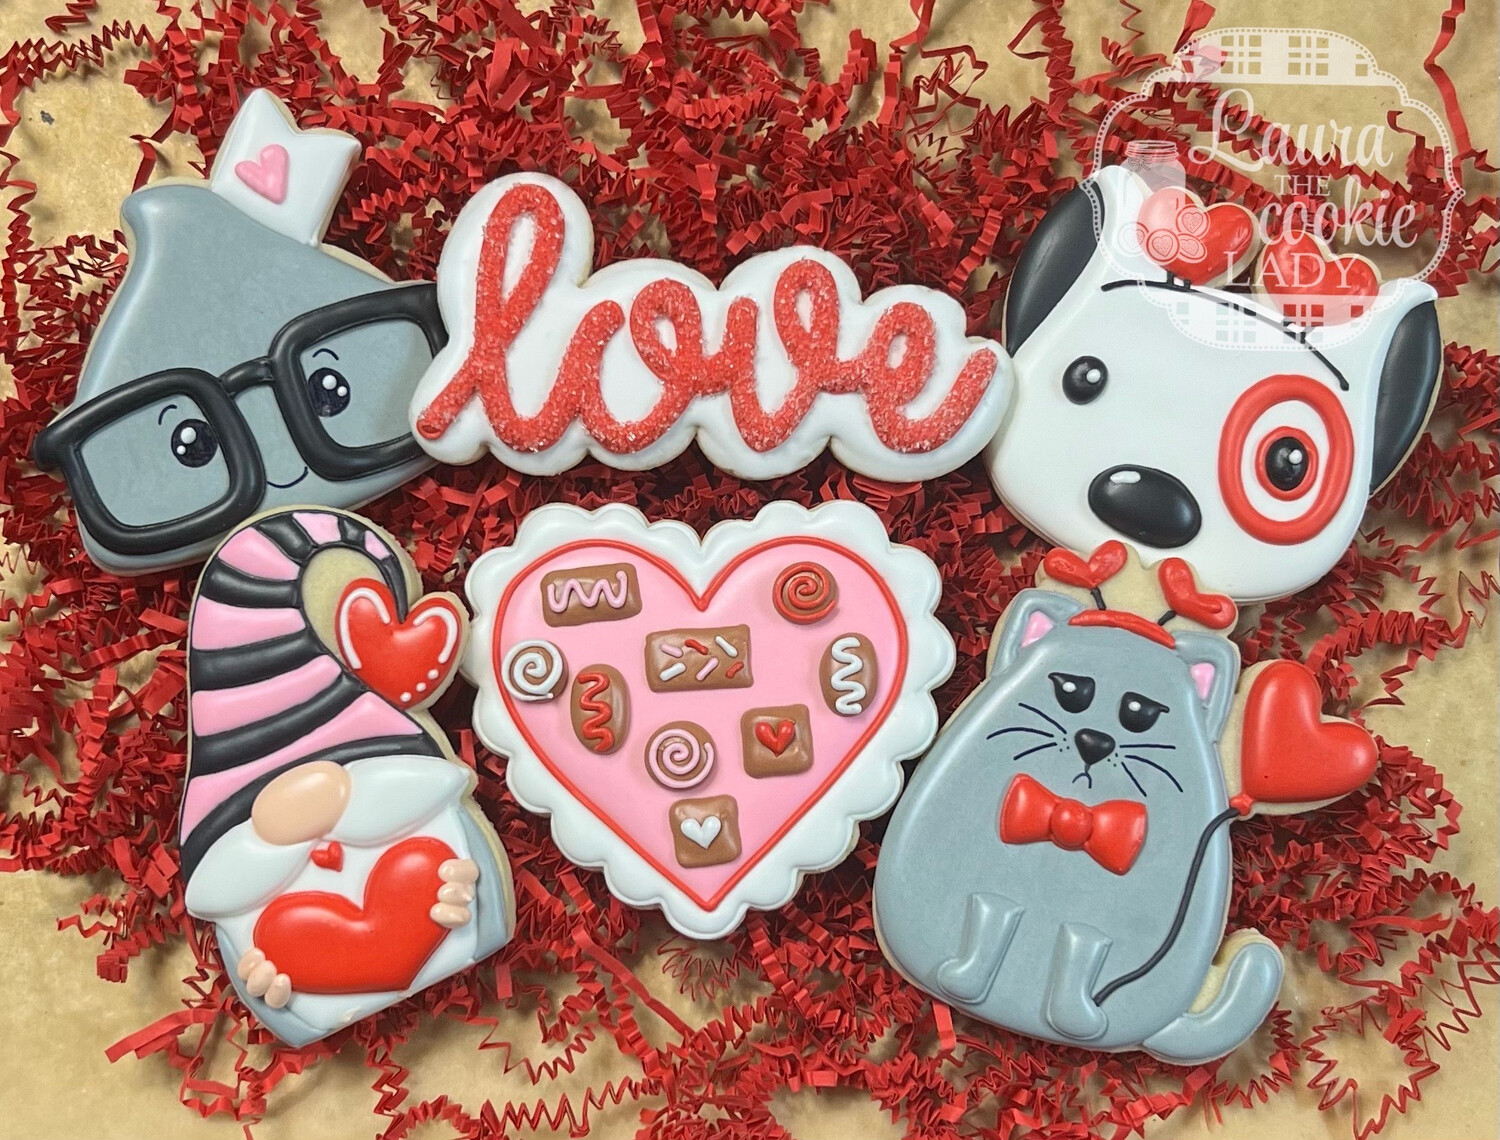 Valentine's Day Cookie Decorating Class Saturday February 11 6-8pm